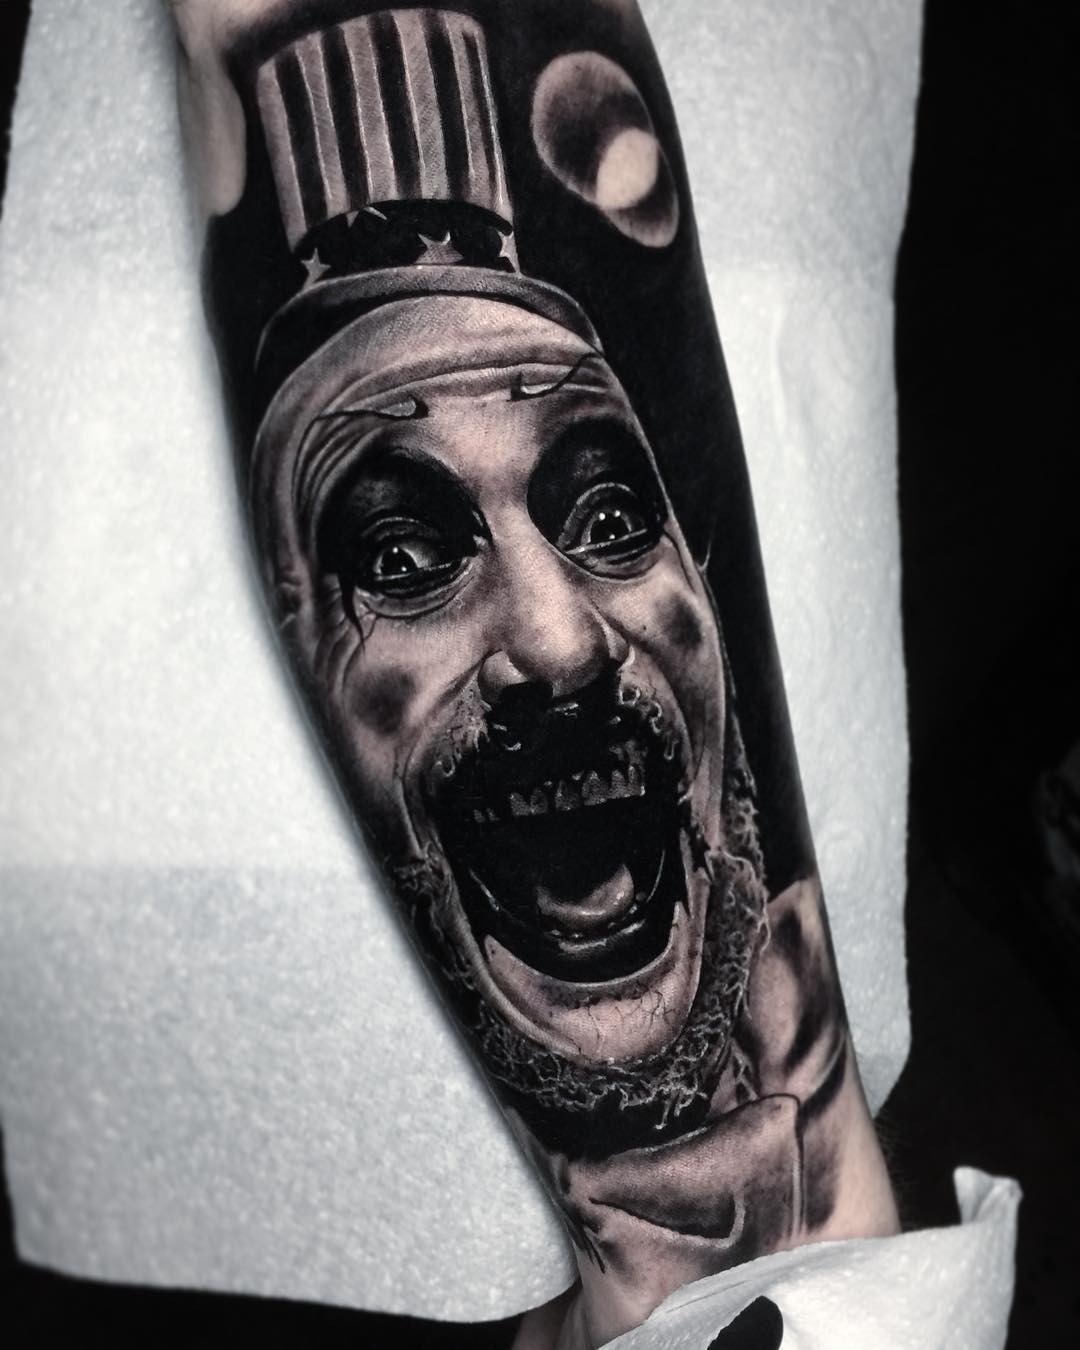 Finished up Captain Spaulding on krisbrandt1 excited how this one came  out  tattoos captainspaulding houseof1000corpses devilsrejects  By  Tattoos by Pablodct  Facebook